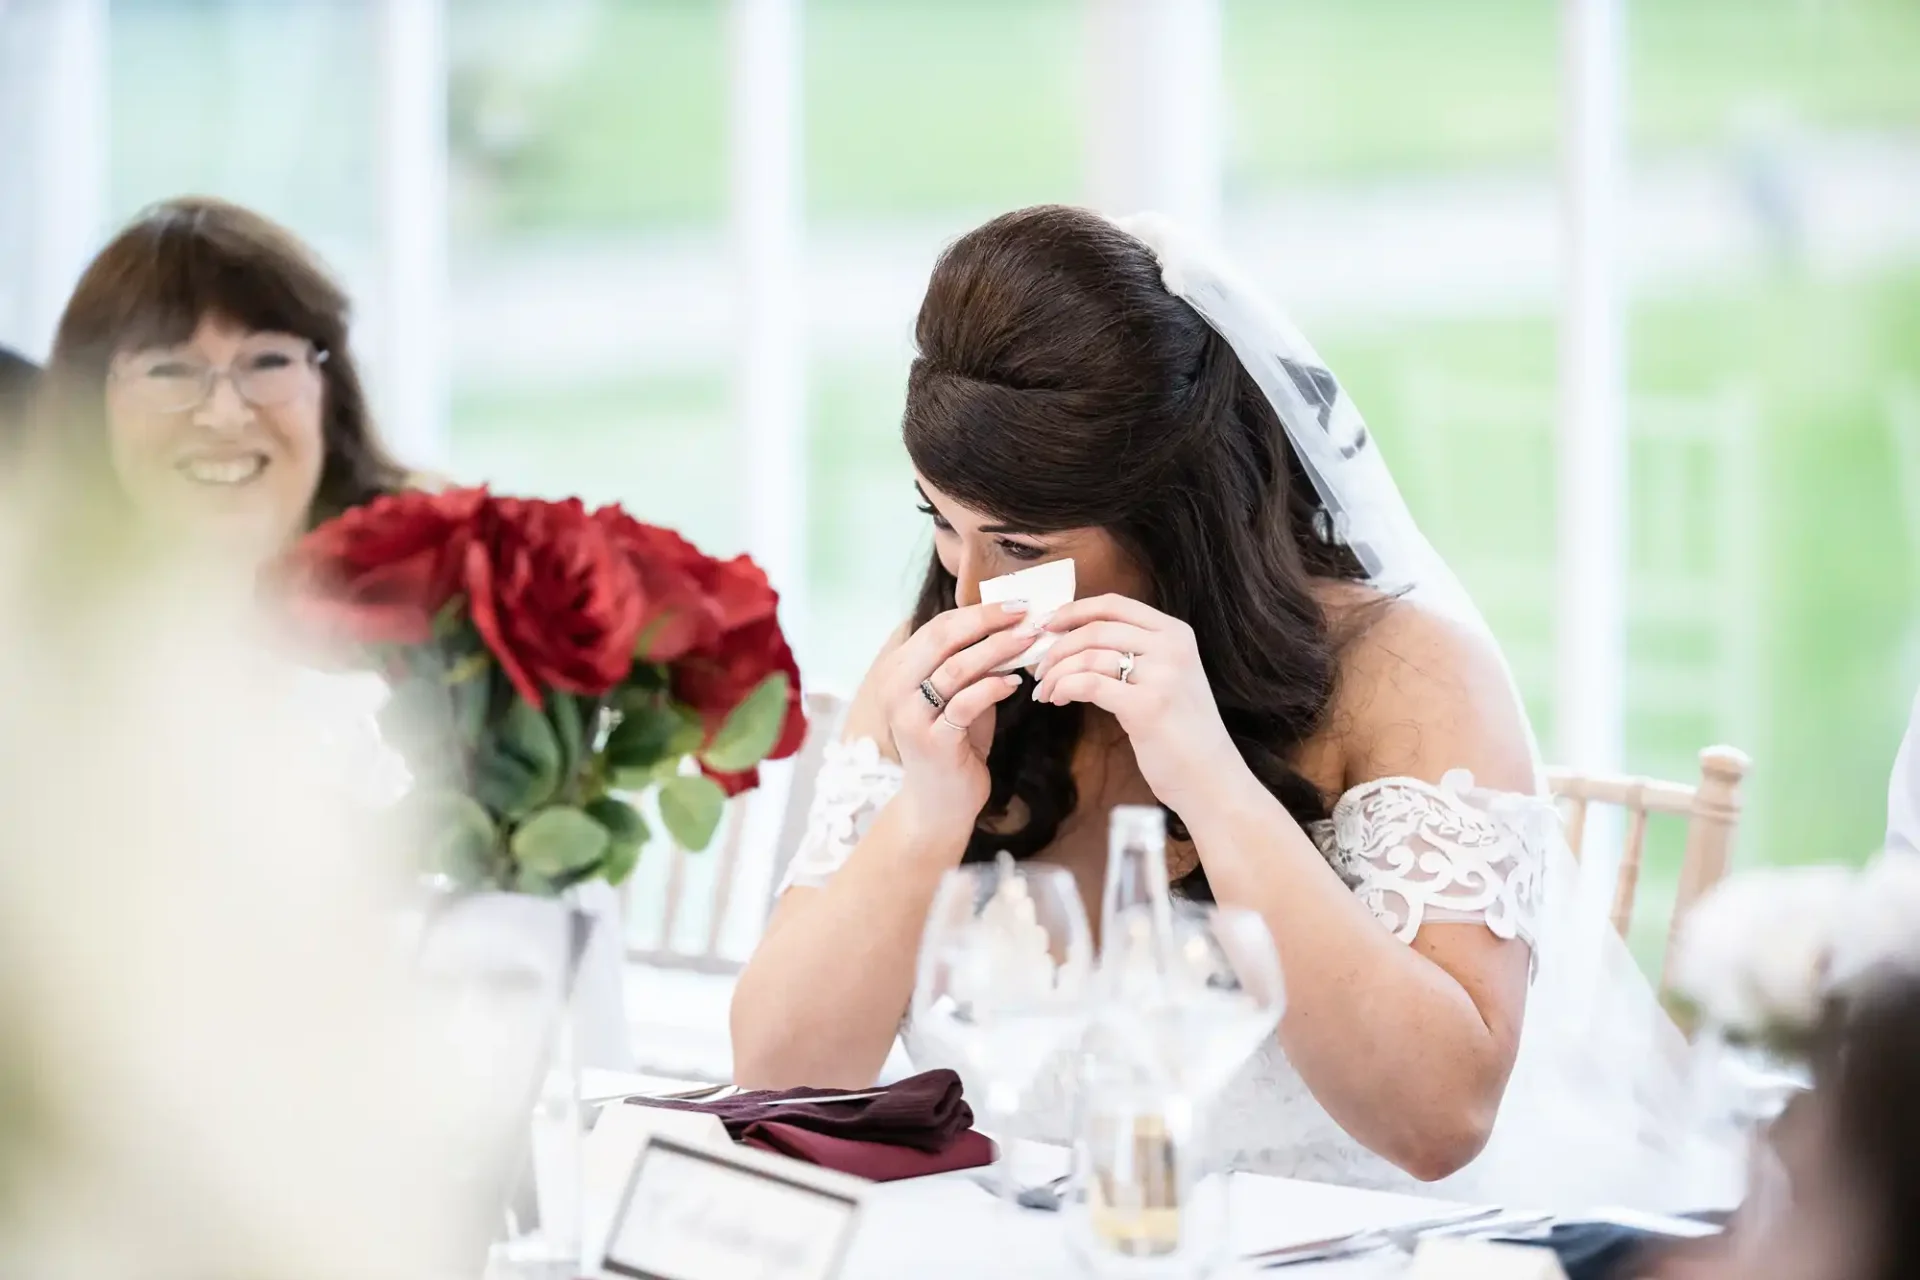 A bride in a white dress wipes tears at a wedding table, with red roses and a smiling guest nearby.